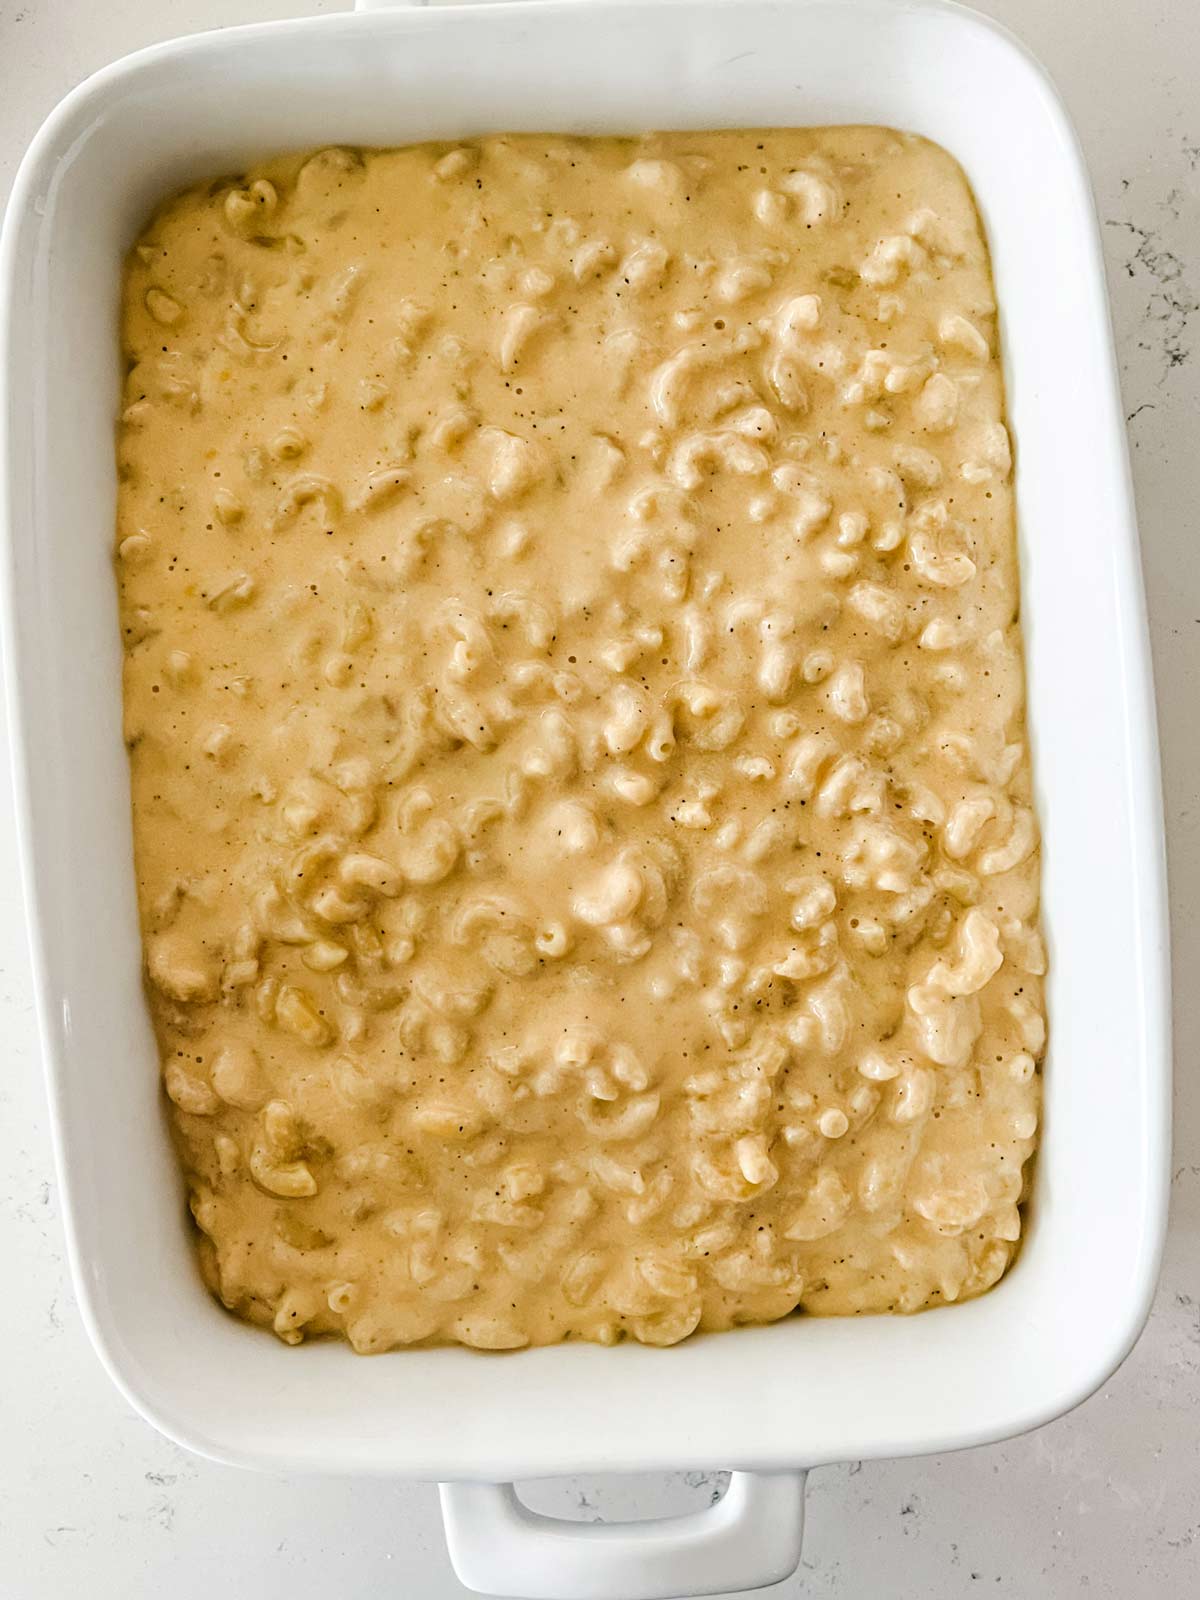 Macaroni and cheese in a white casserole dish.